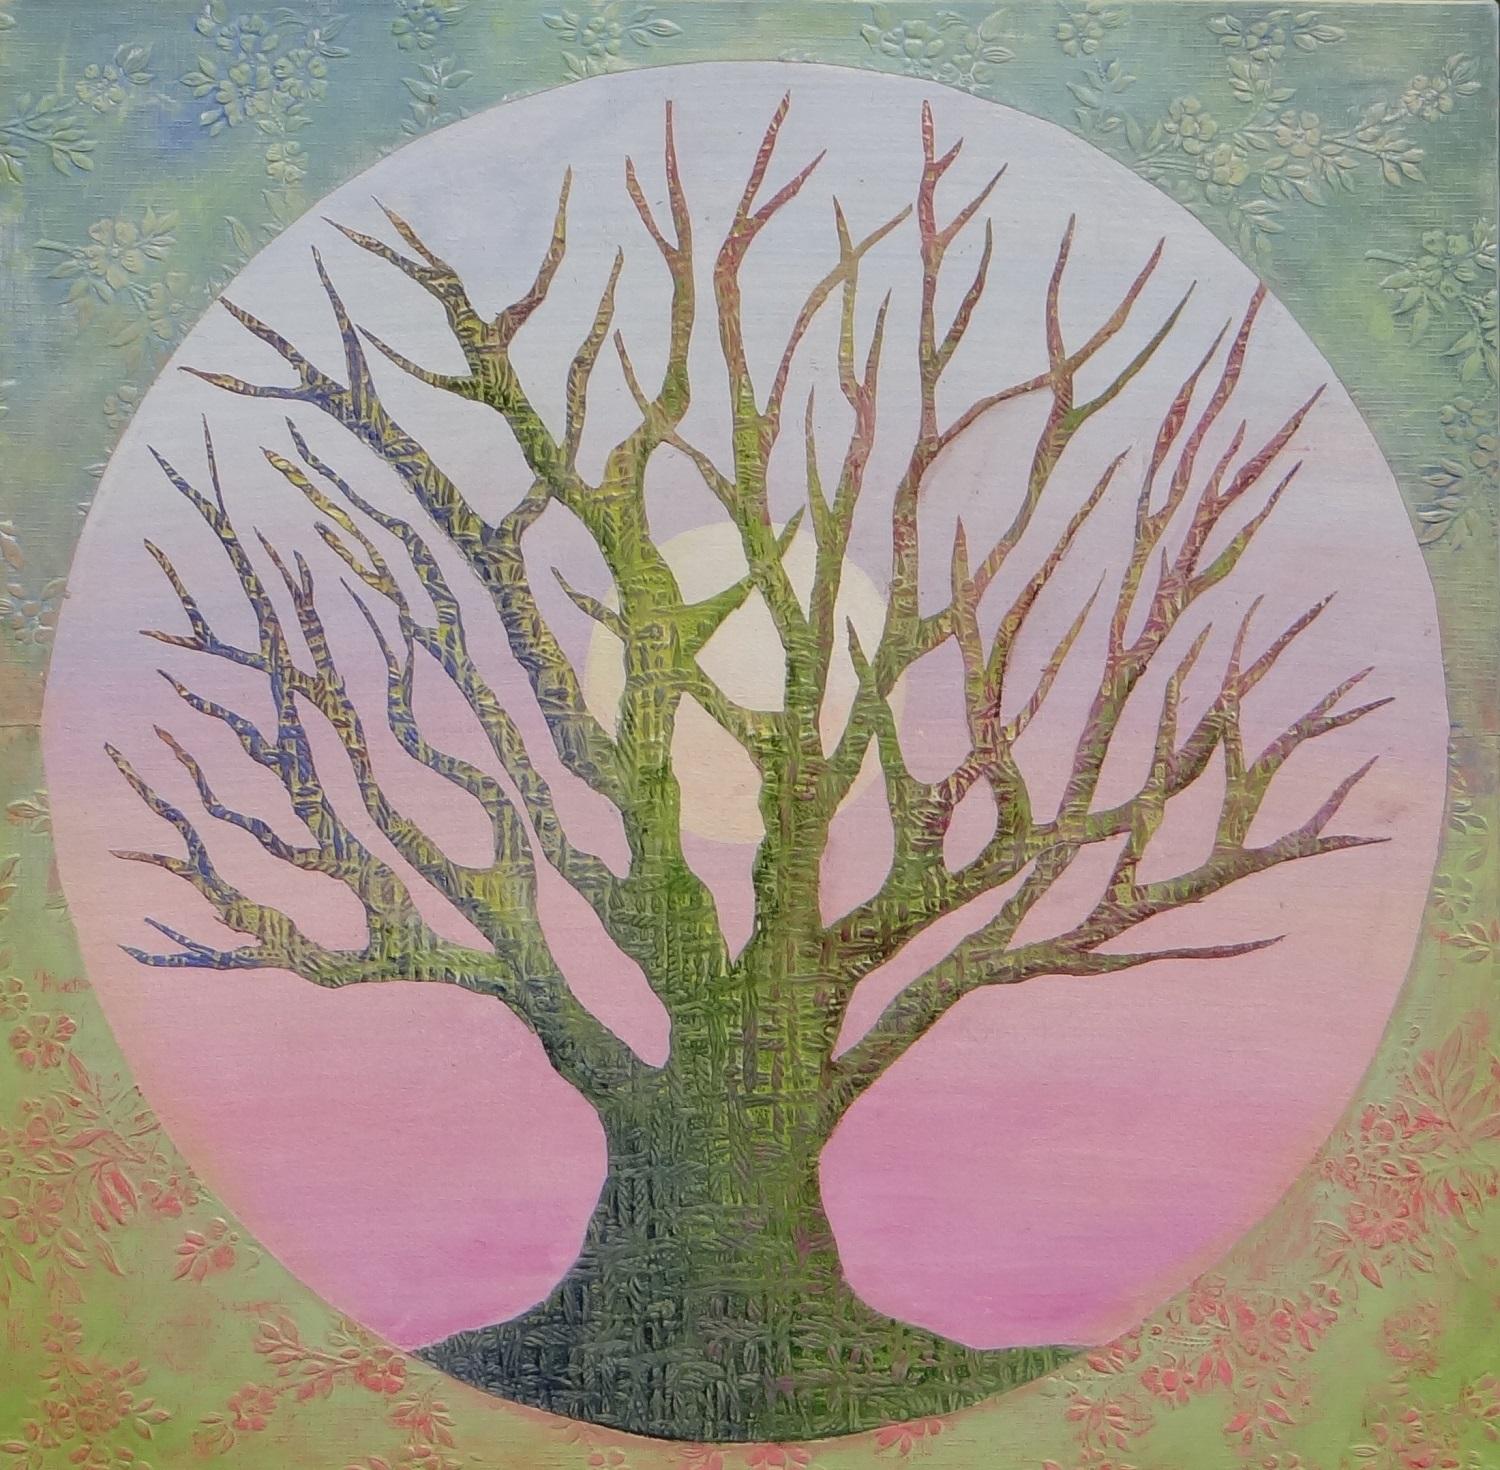 Tree of Life - Spring, Original Painting - Mixed Media Art by Brit J. Oie